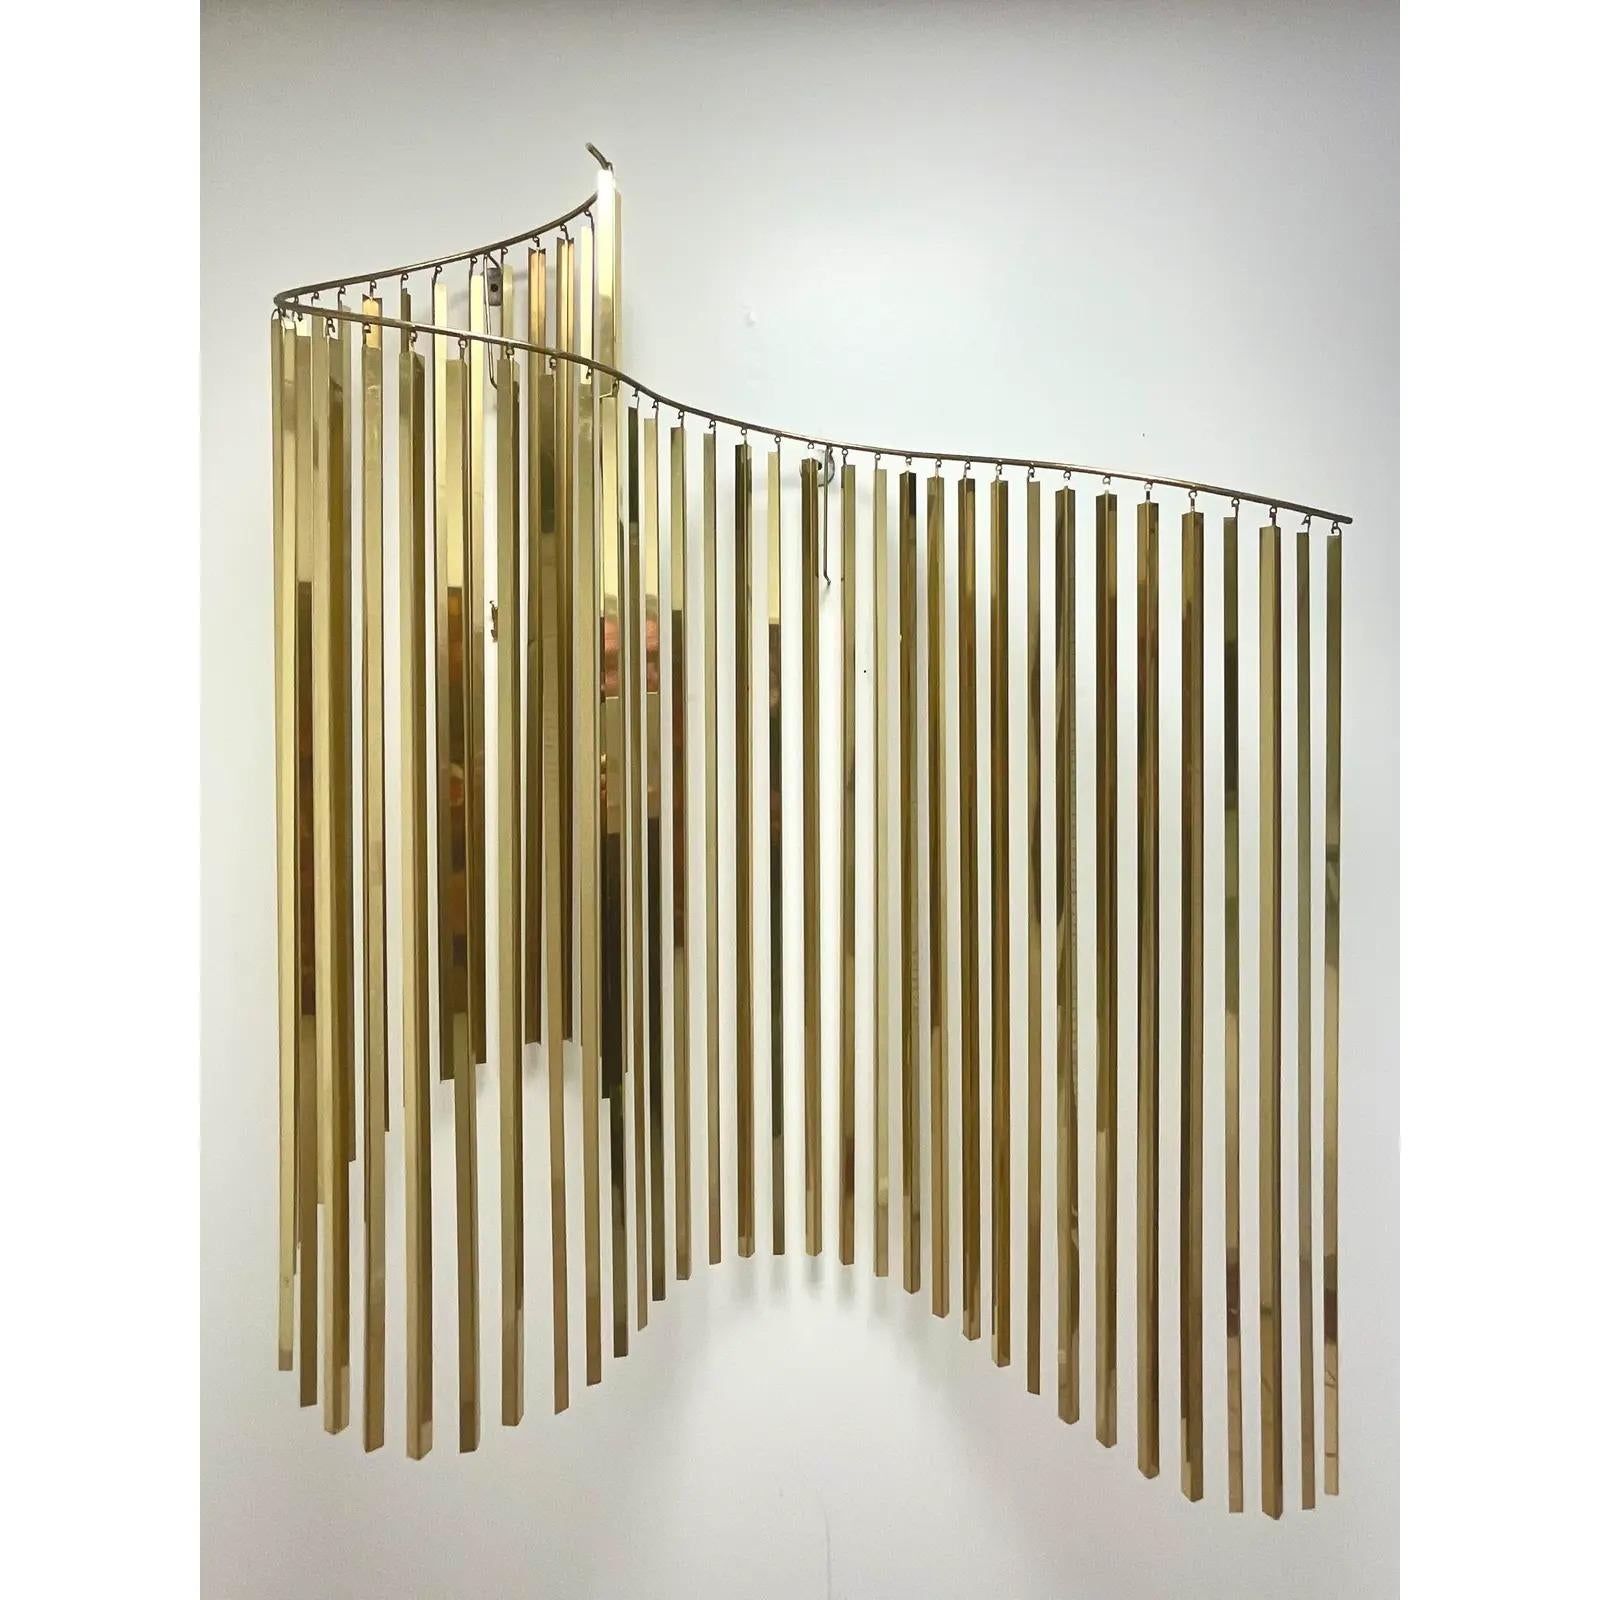 Fantastic vintage 80s brass wall sculpture. Done in the manner of Curtis Jere. Beautiful brass blades suspended from a rolling bar. Acquired from a Palm Beach estate.